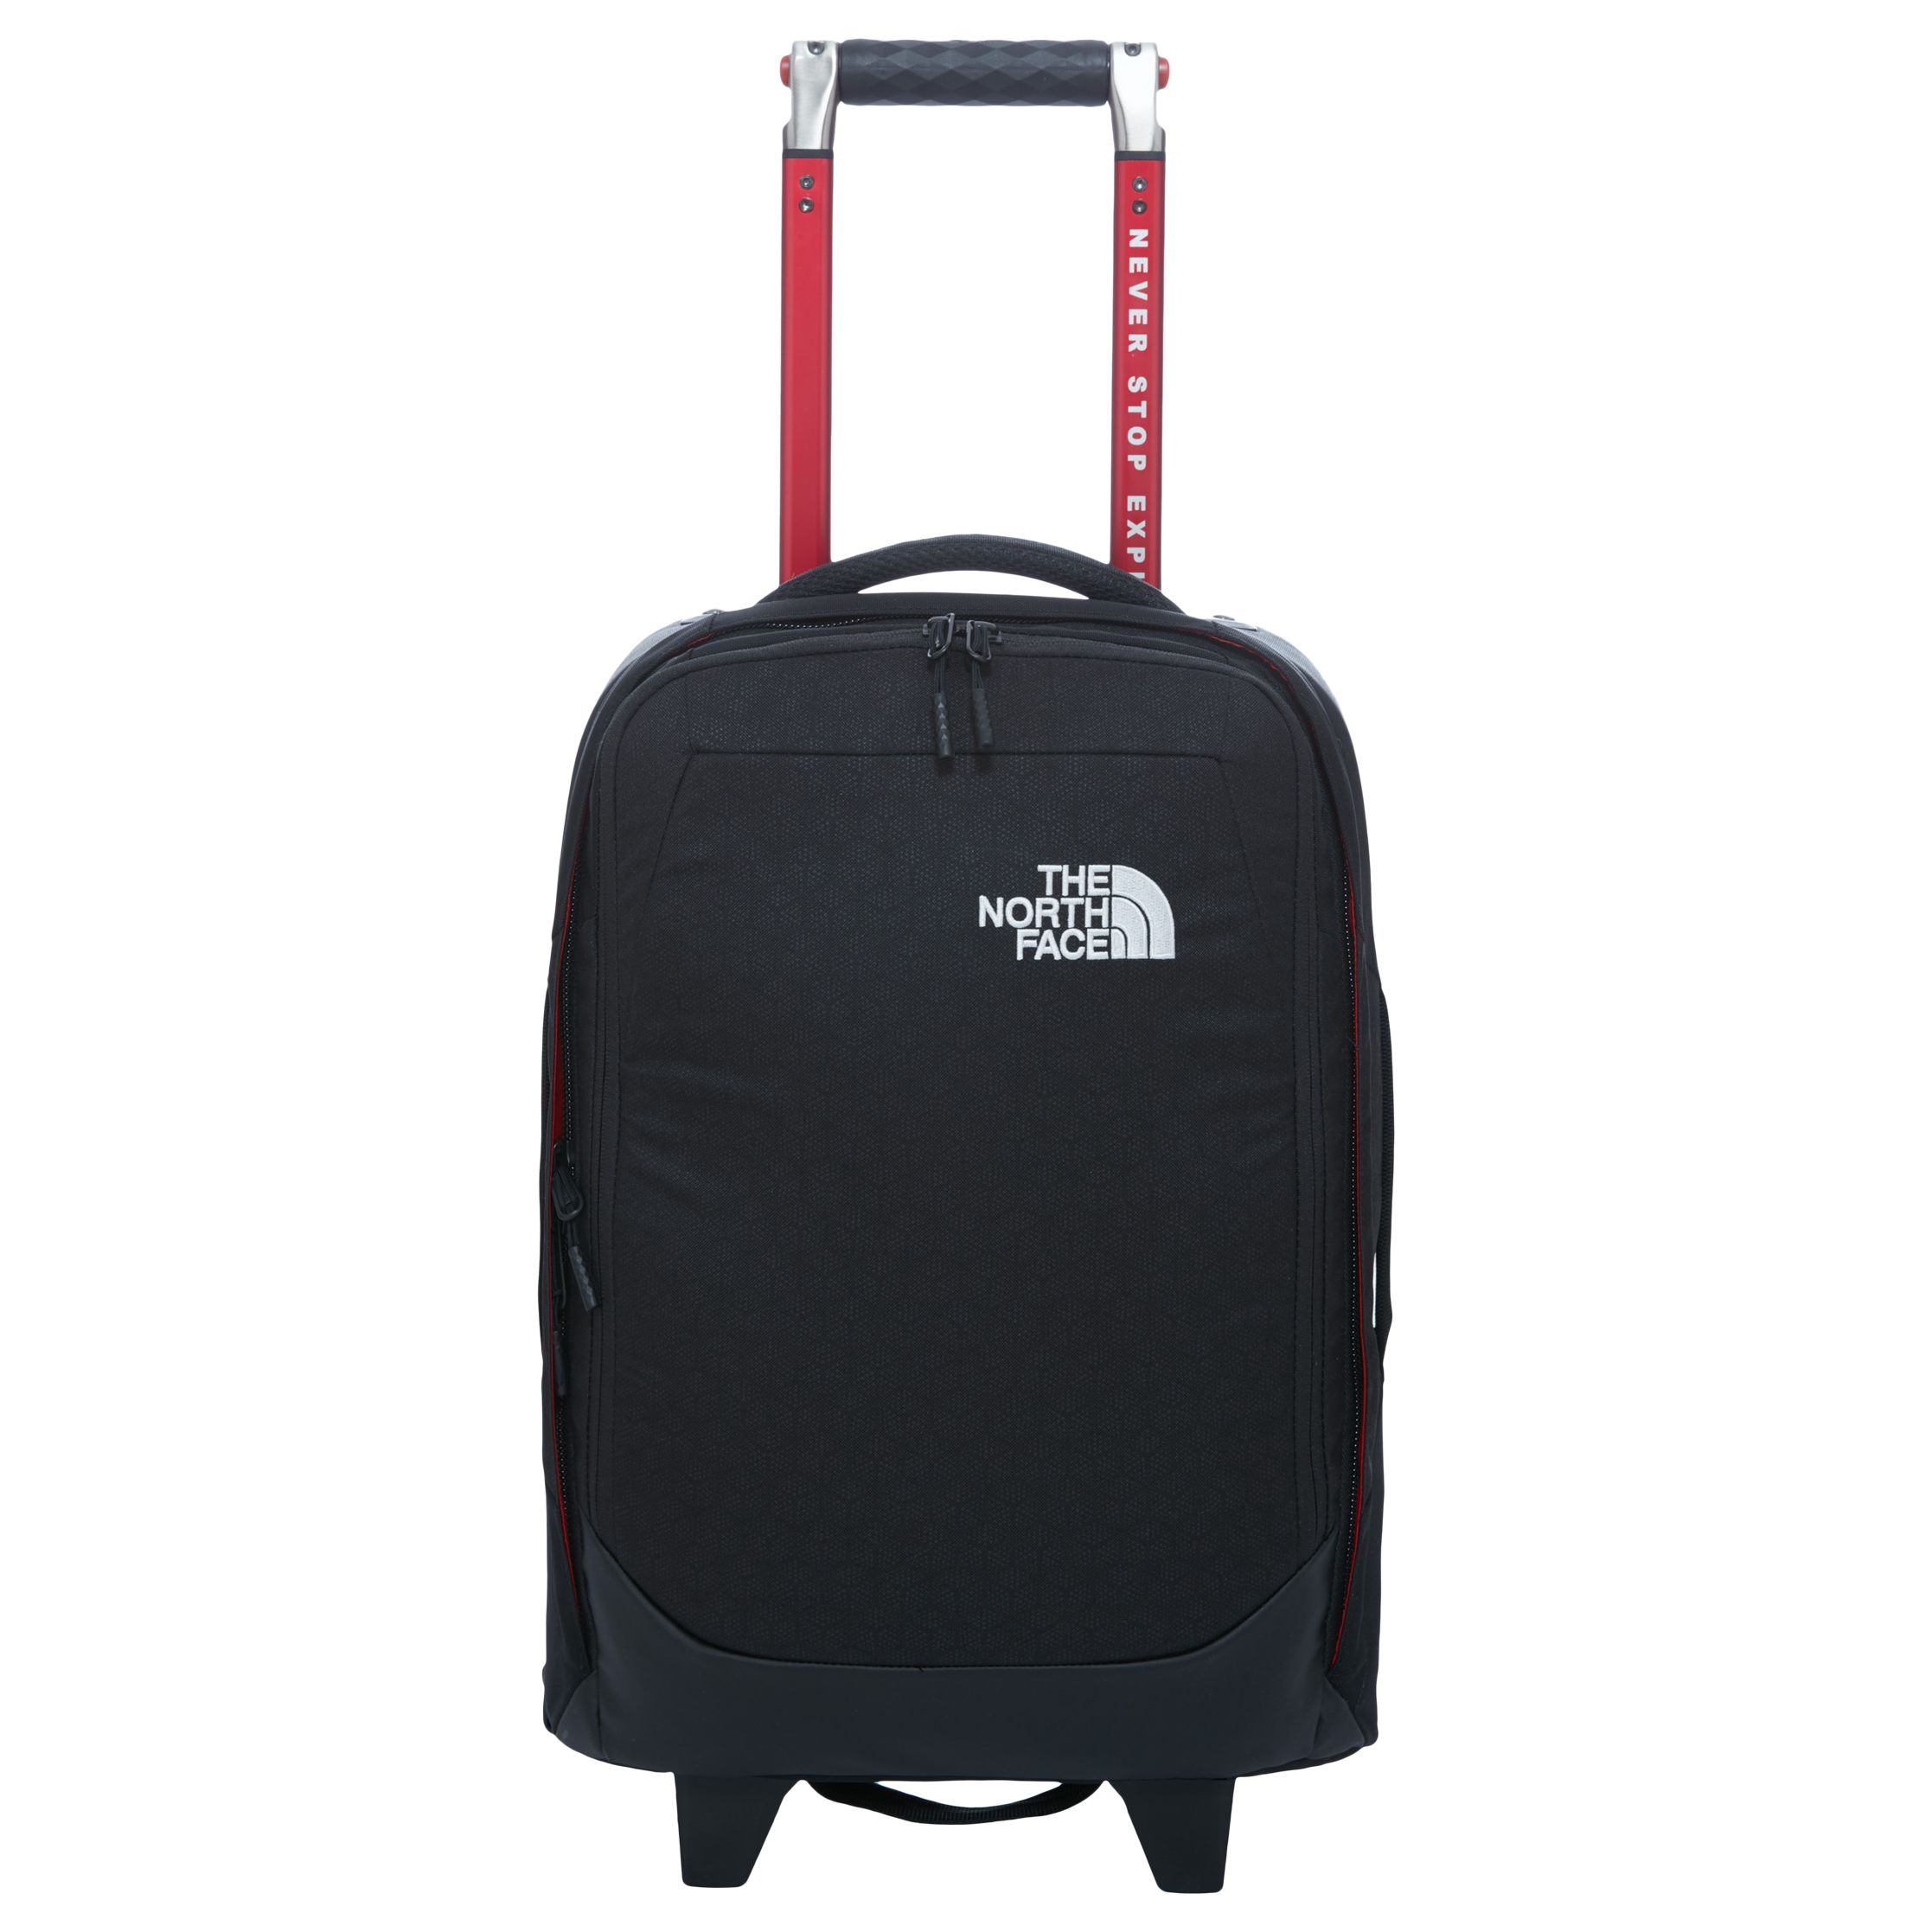 The North Face Overhead Cabin Bag, Black